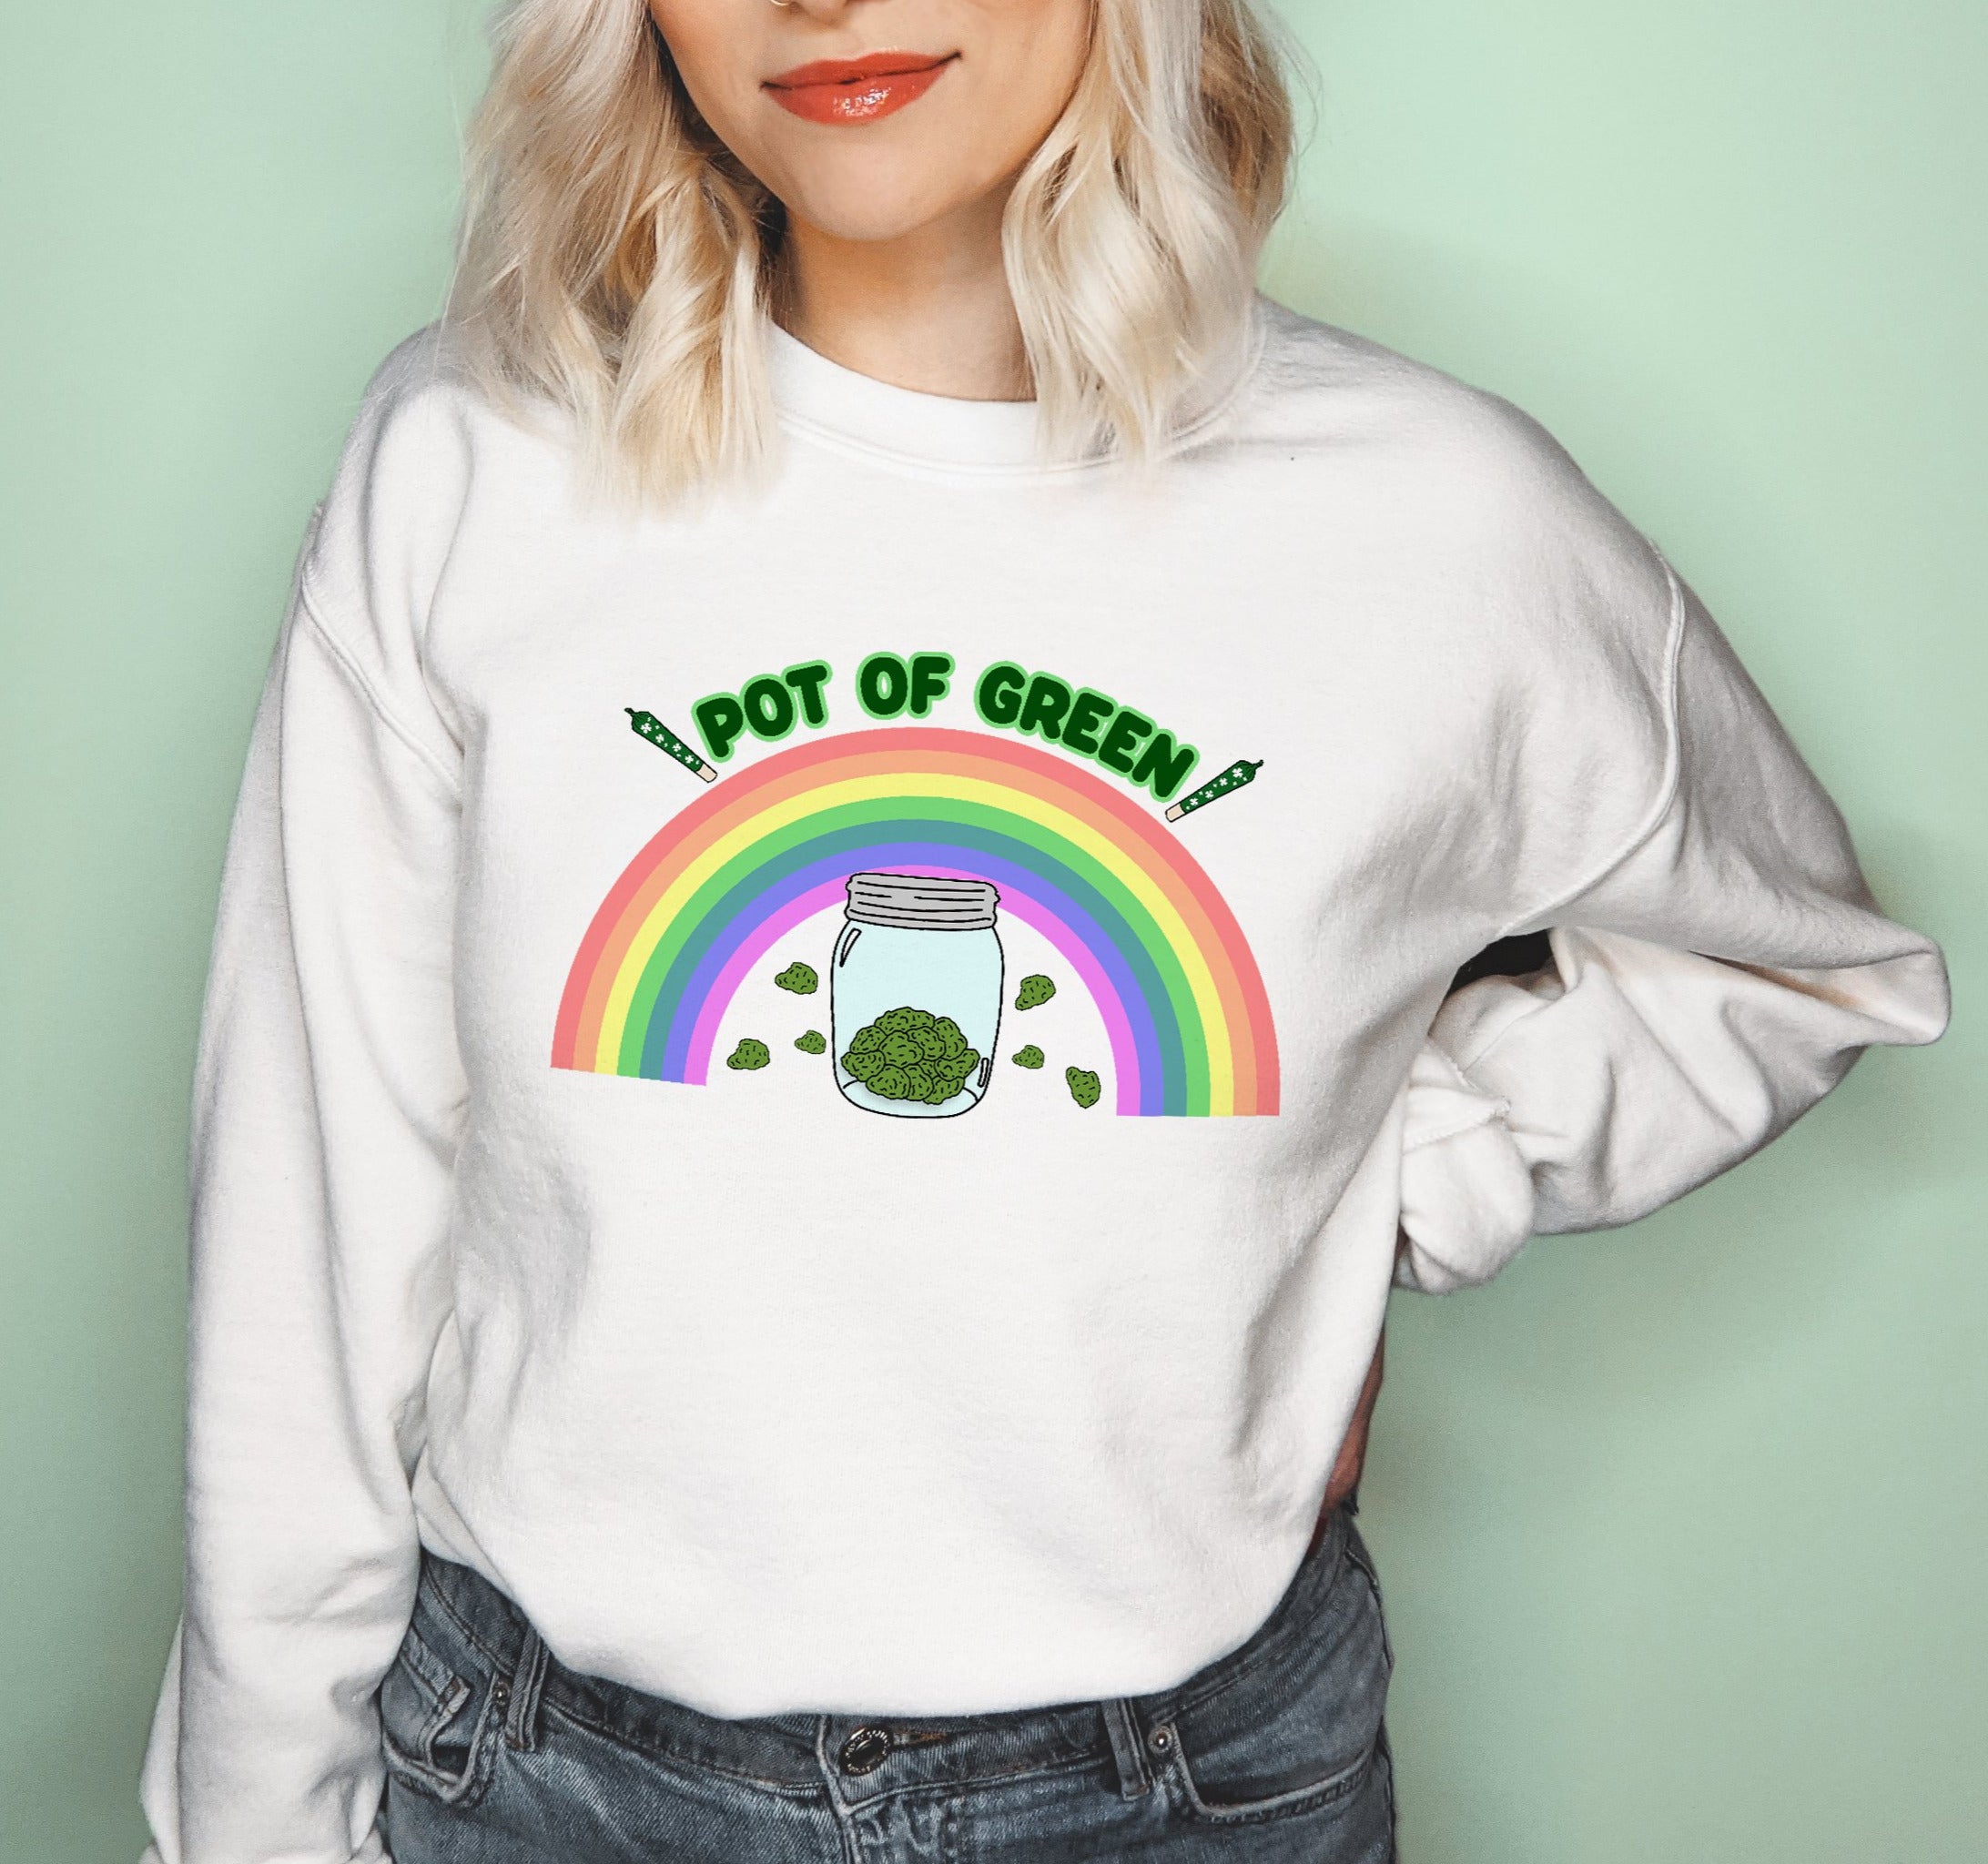 White sweatshirt with a rainbow and a jar of weed saying pot of green - HighCiti